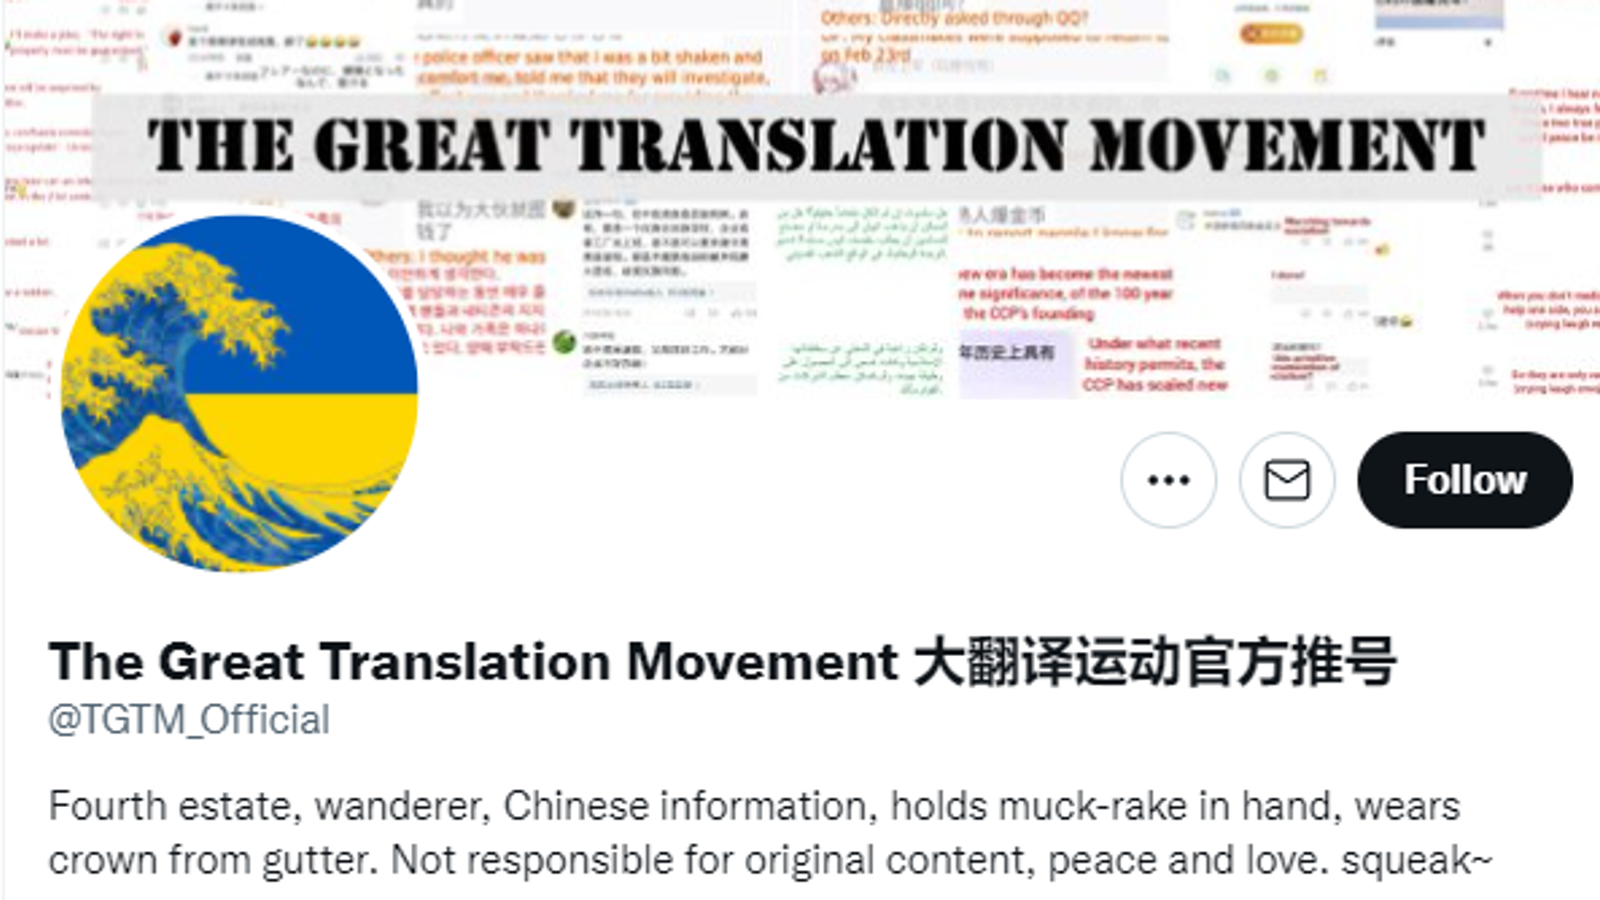 The Great Translation Movement: ‘Despicable’ group accused of smearing China’s image insists its exposing online ‘echo chamber’